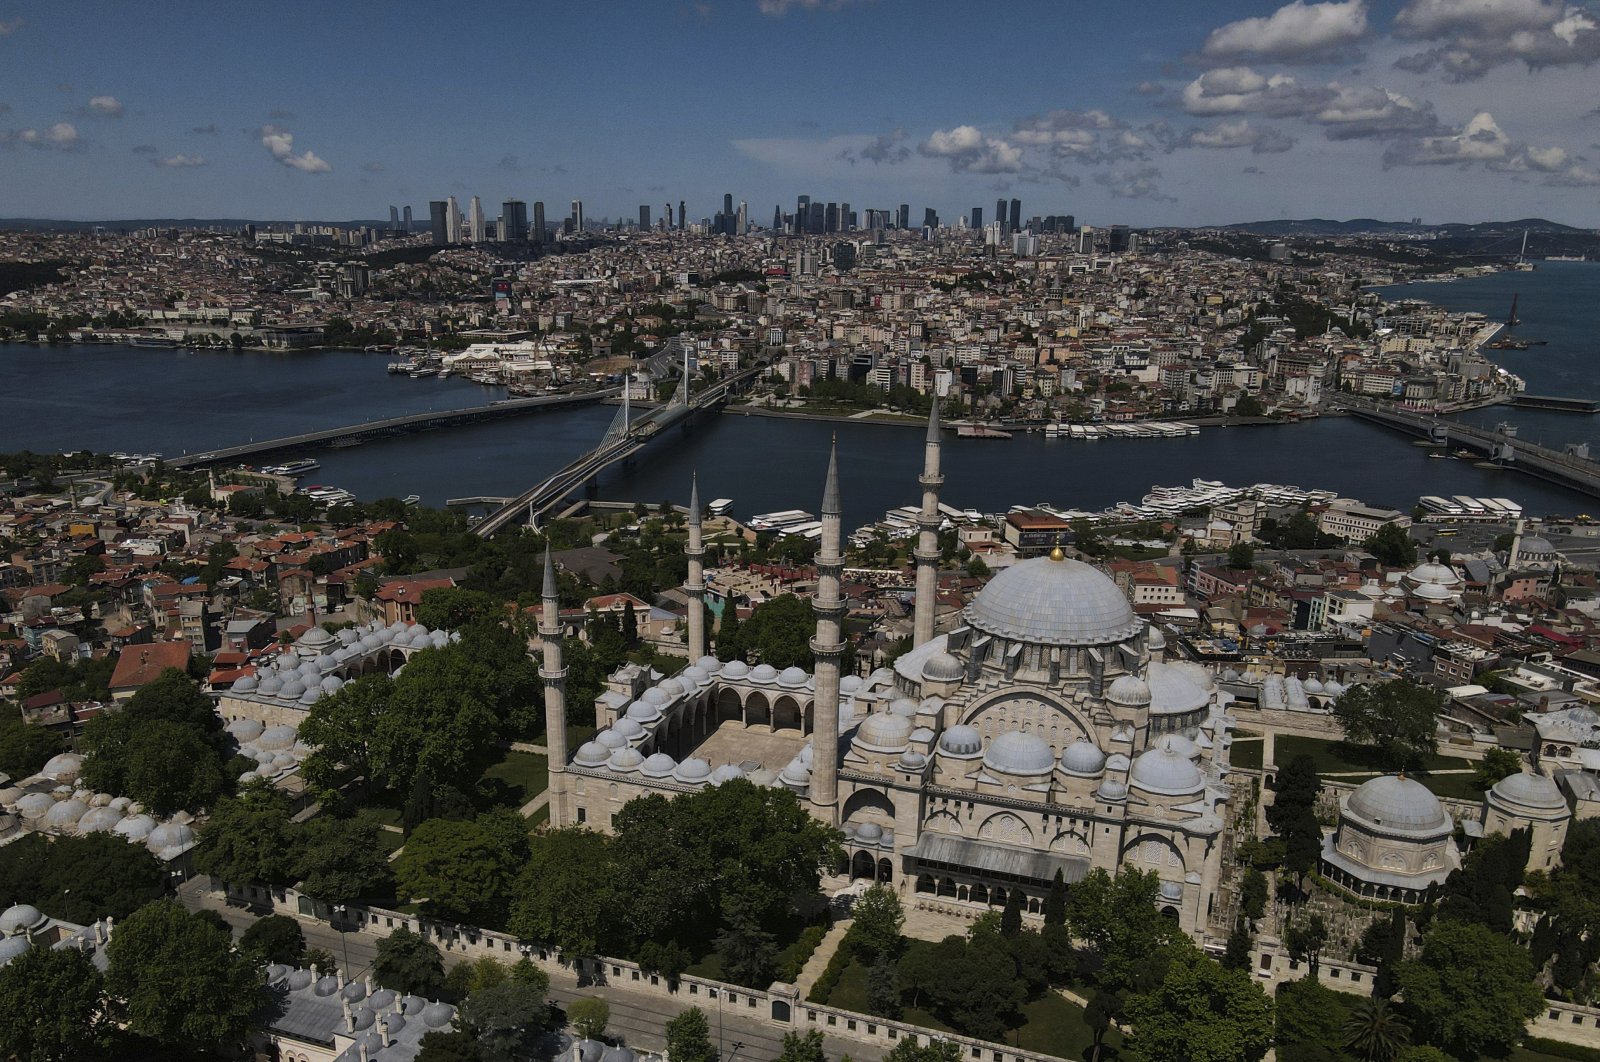 An aerial view of the historical district of Istanbul during the last day of a four-day curfew due to the coronavirus outbreak, Turkey, May 26, 2020. (AP Photo)